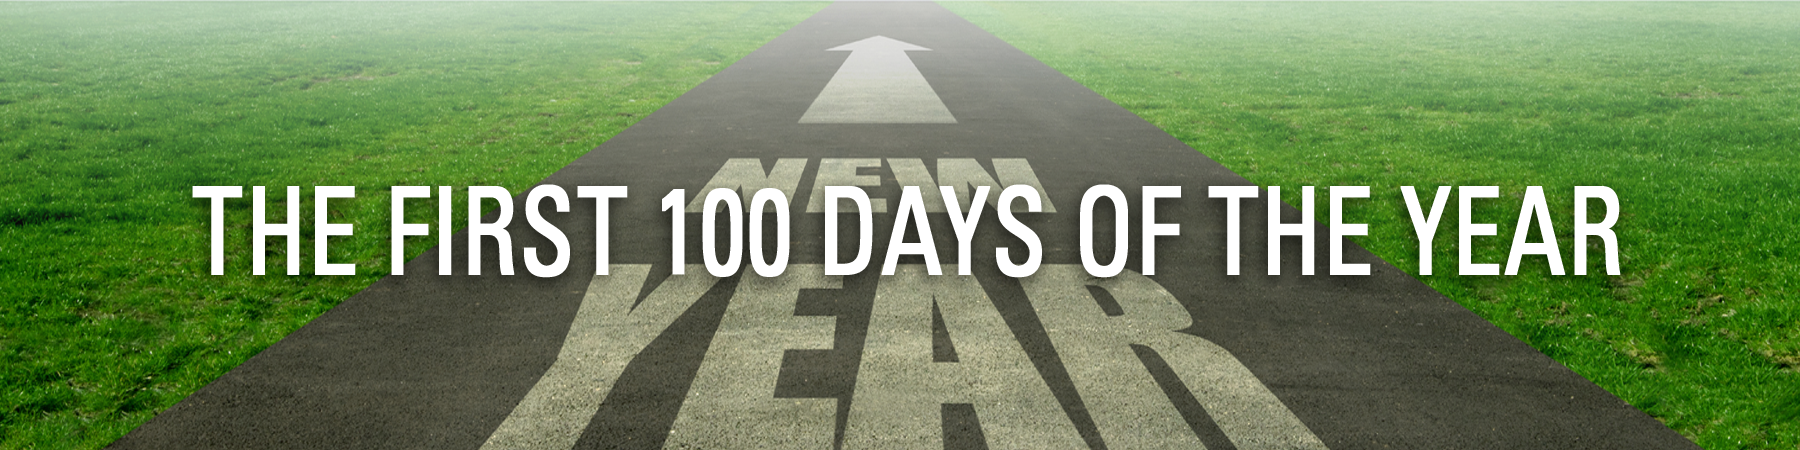 The First 100 Days Of The Year